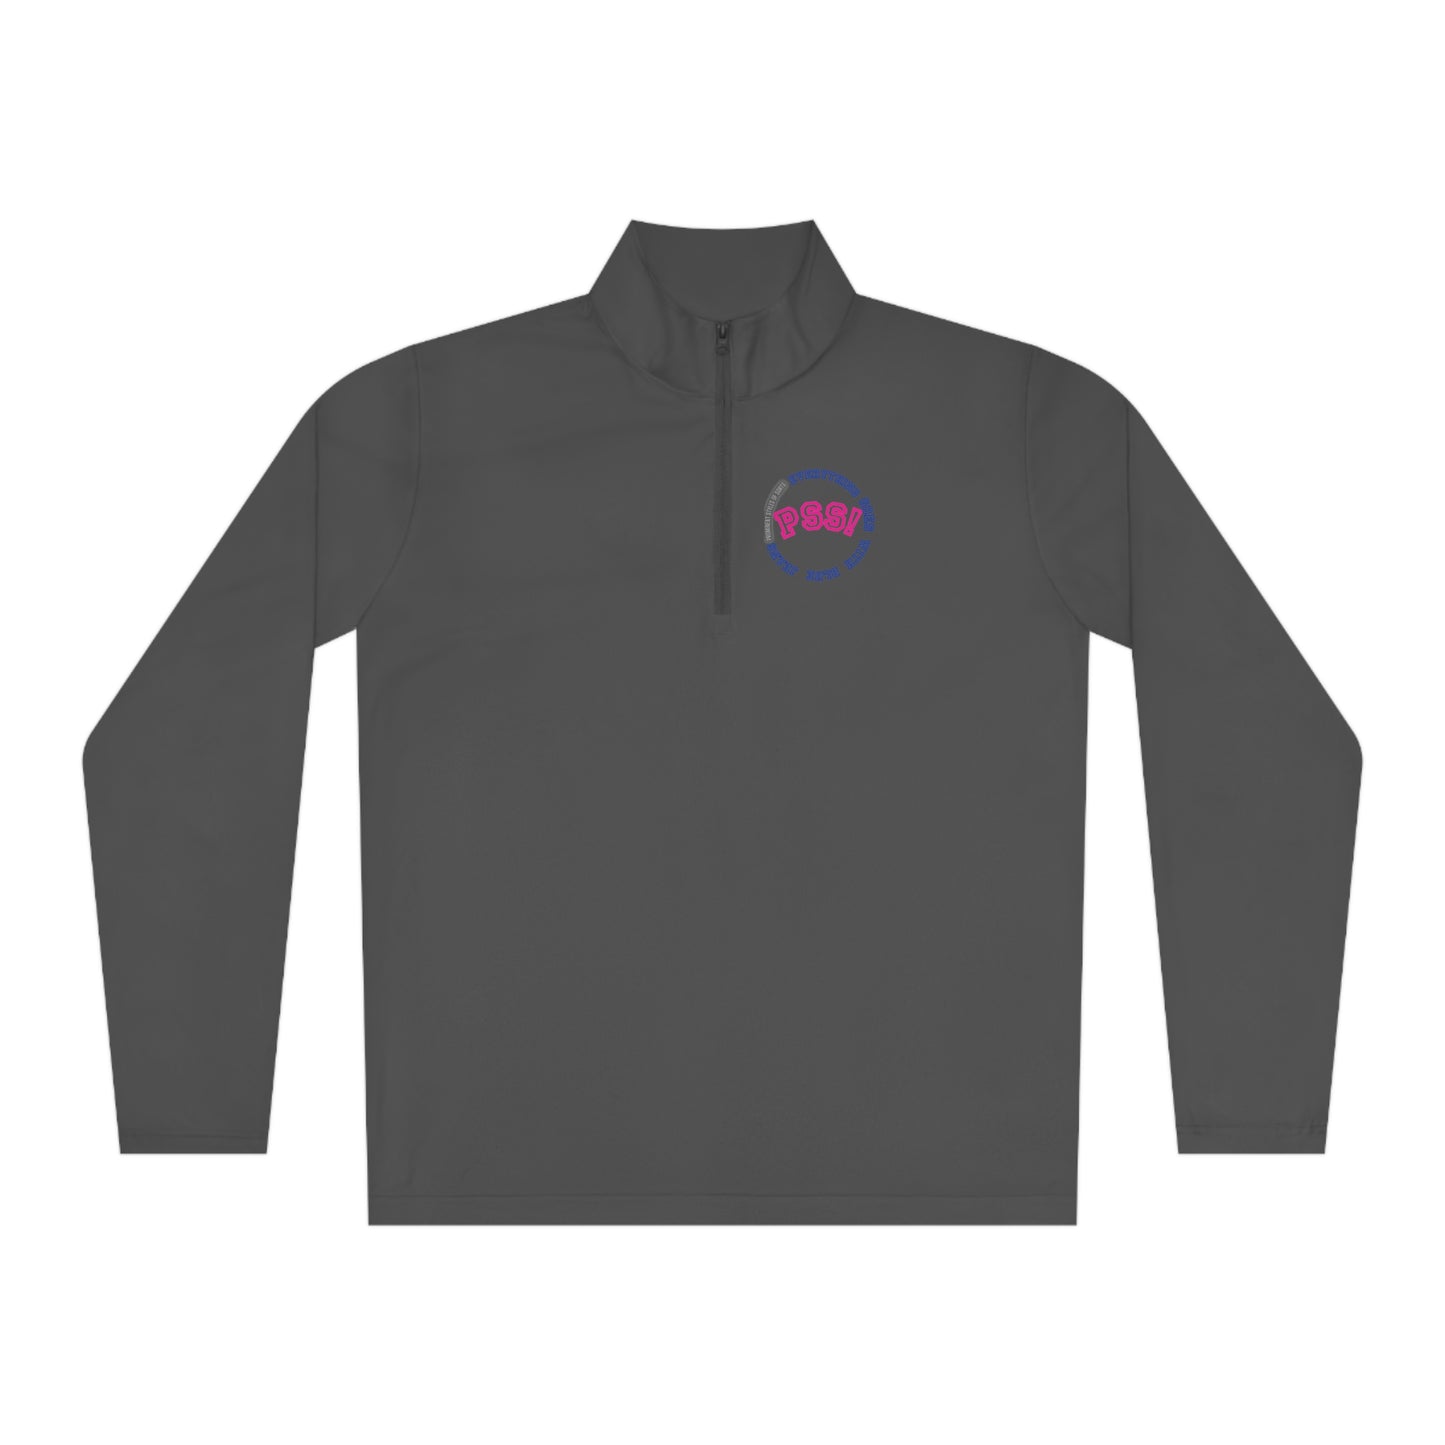 PSS! Unisex Quarter-Zip Pullover - Prominent Styles of Sorts- PSS!